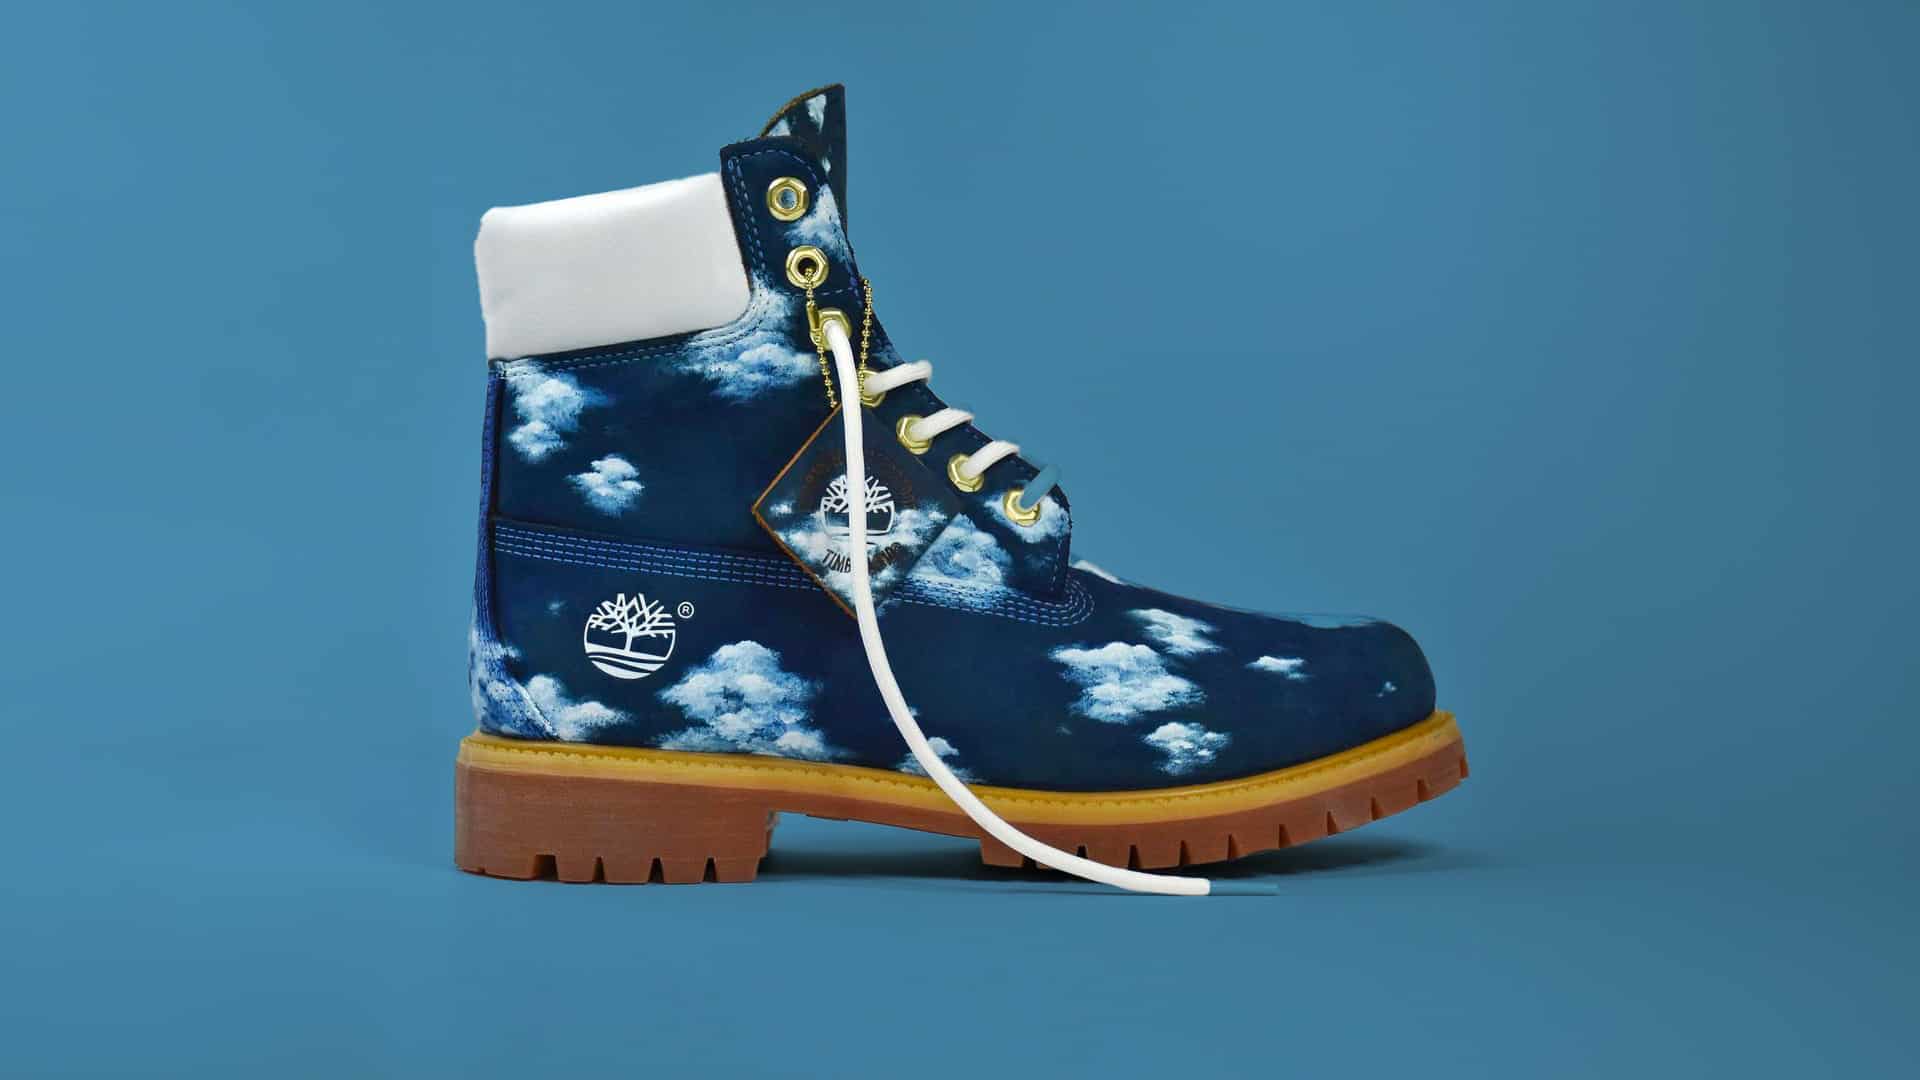 Gorgeous Custom “Cloudy” Timberlands Are Heaven on Earth